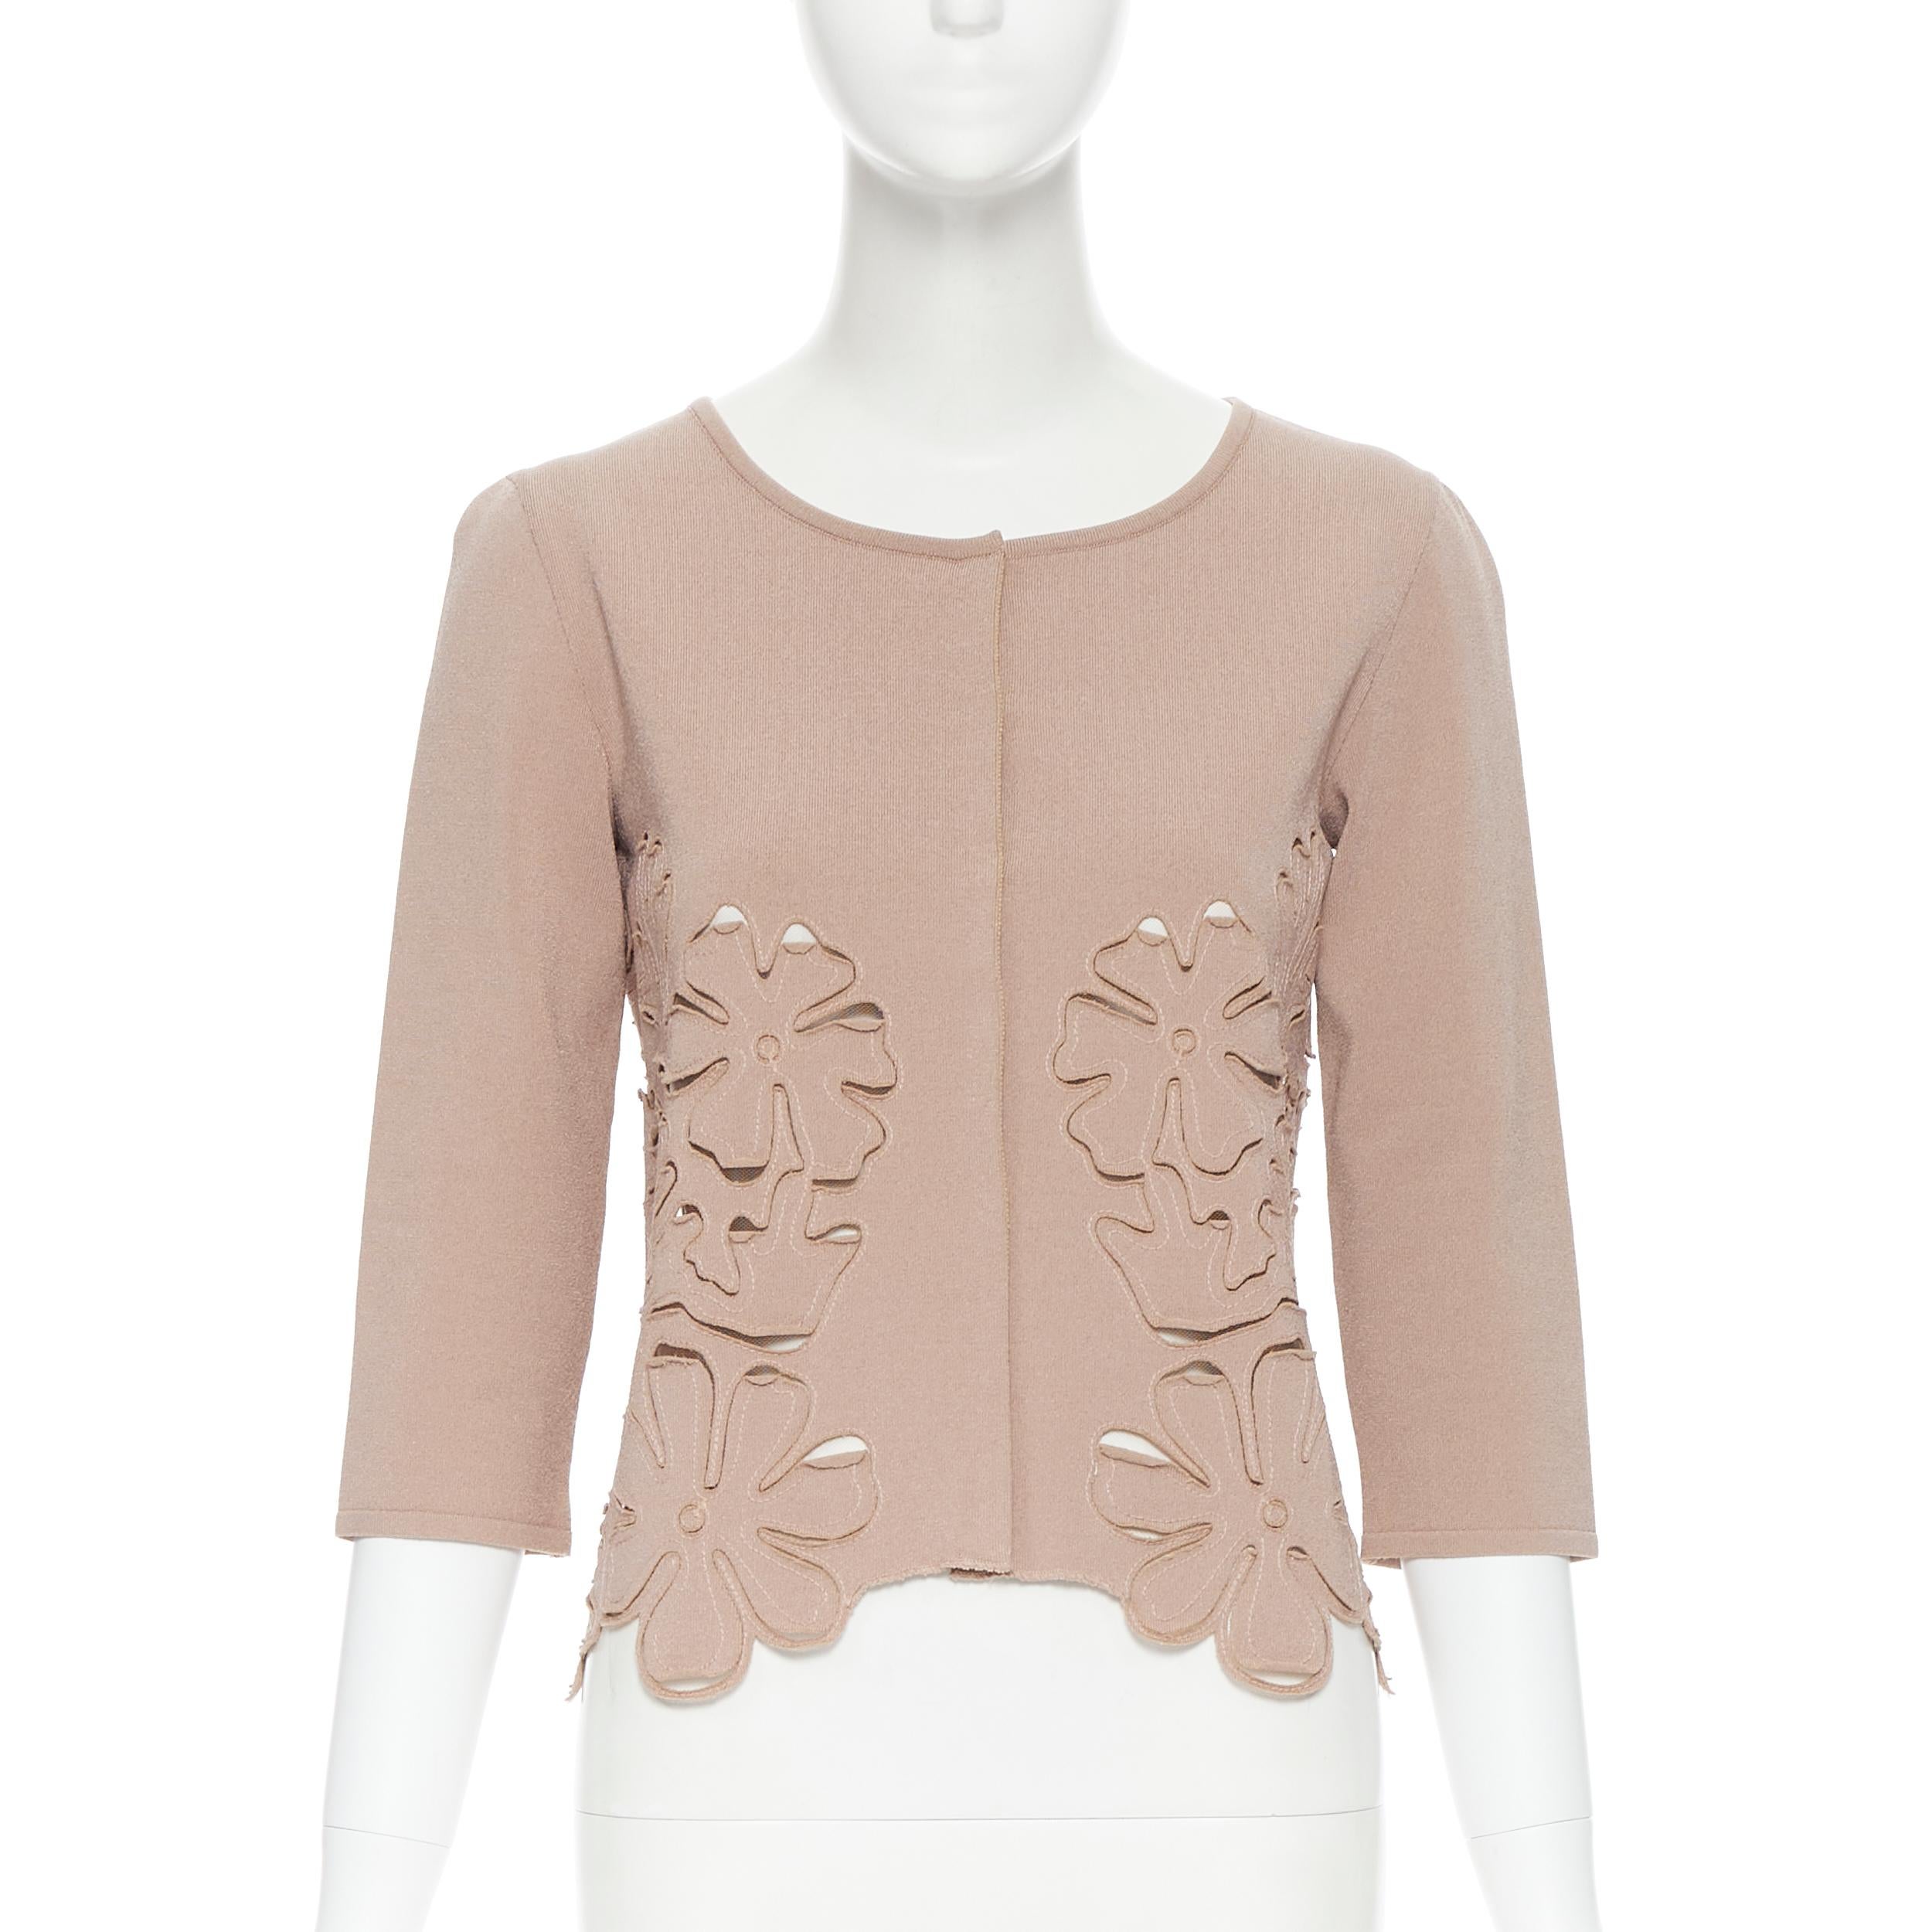 ALBERTA FERRETTI rayon blend knit nude beige floral cut out cardigan sweater XS 
Reference: LNKO/A01728 
Brand: Alberta Ferretti 
Designer: Alberta Ferretti 
Material: Rayon 
Color: Beige 
Pattern: Floral 
Closure: Button 
Extra Detail: Viscose